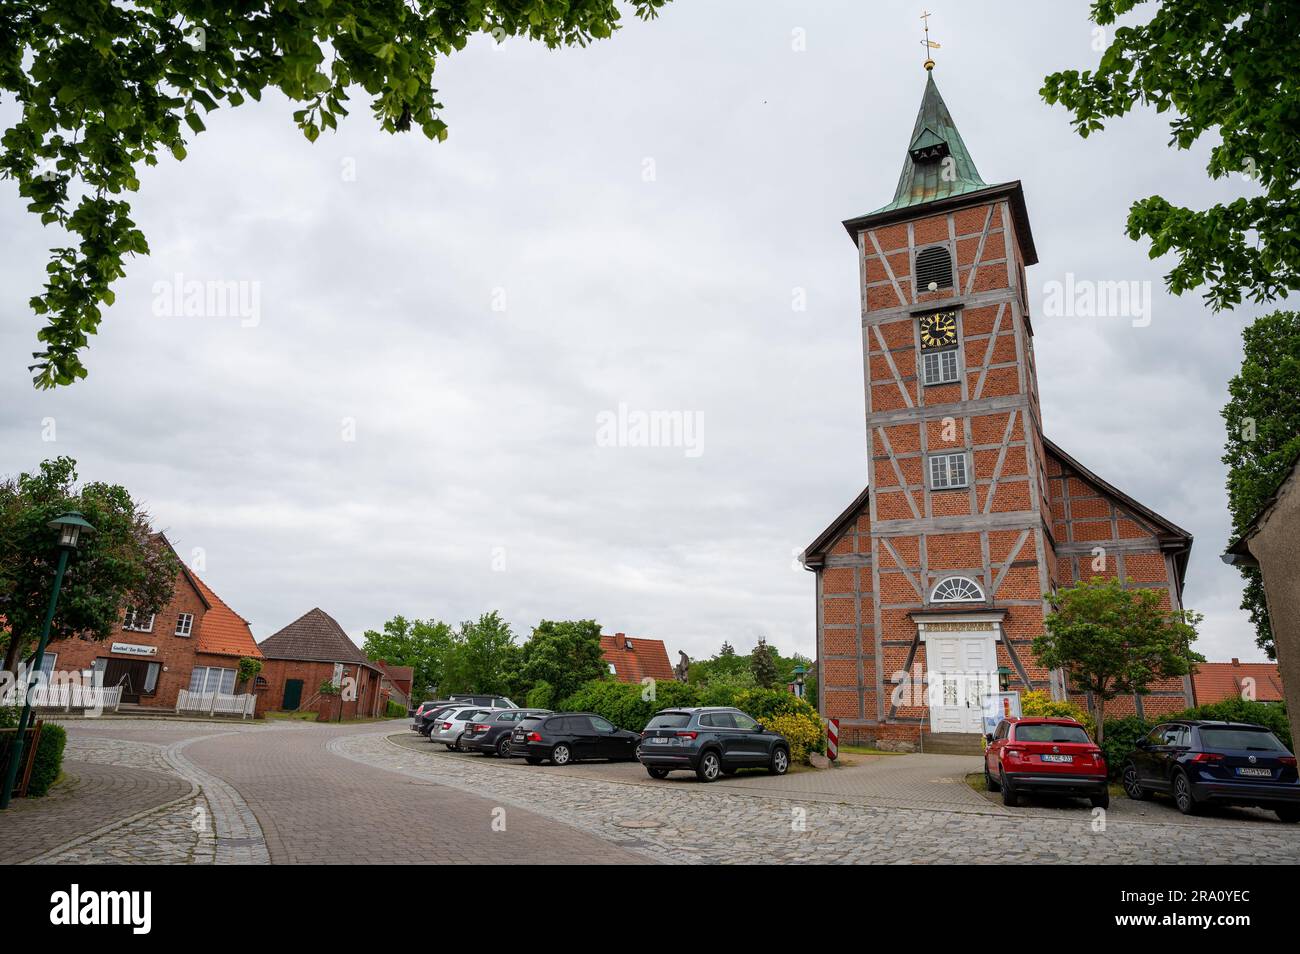 PRODUCTION - 24 May 2023, Lower Saxony, Amt Neuhaus: The church of the village. The end of June marks the 30th anniversary of the day when Amt Neuhaus and parts of the town of Bleckede were reincorporated into the district of Lüneburg. Since 1993 the Amt Neuhaus and parts of the town Bleckede belong again to the district Lüneburg. During the German division, the towns on the right bank of the Elbe were part of the GDR. After the German reunification the unification took place. On June 30, 1993, the reincorporation of the municipality of Amt Neuhaus and the districts of Neu Bleckede and Neu Wen Stock Photo